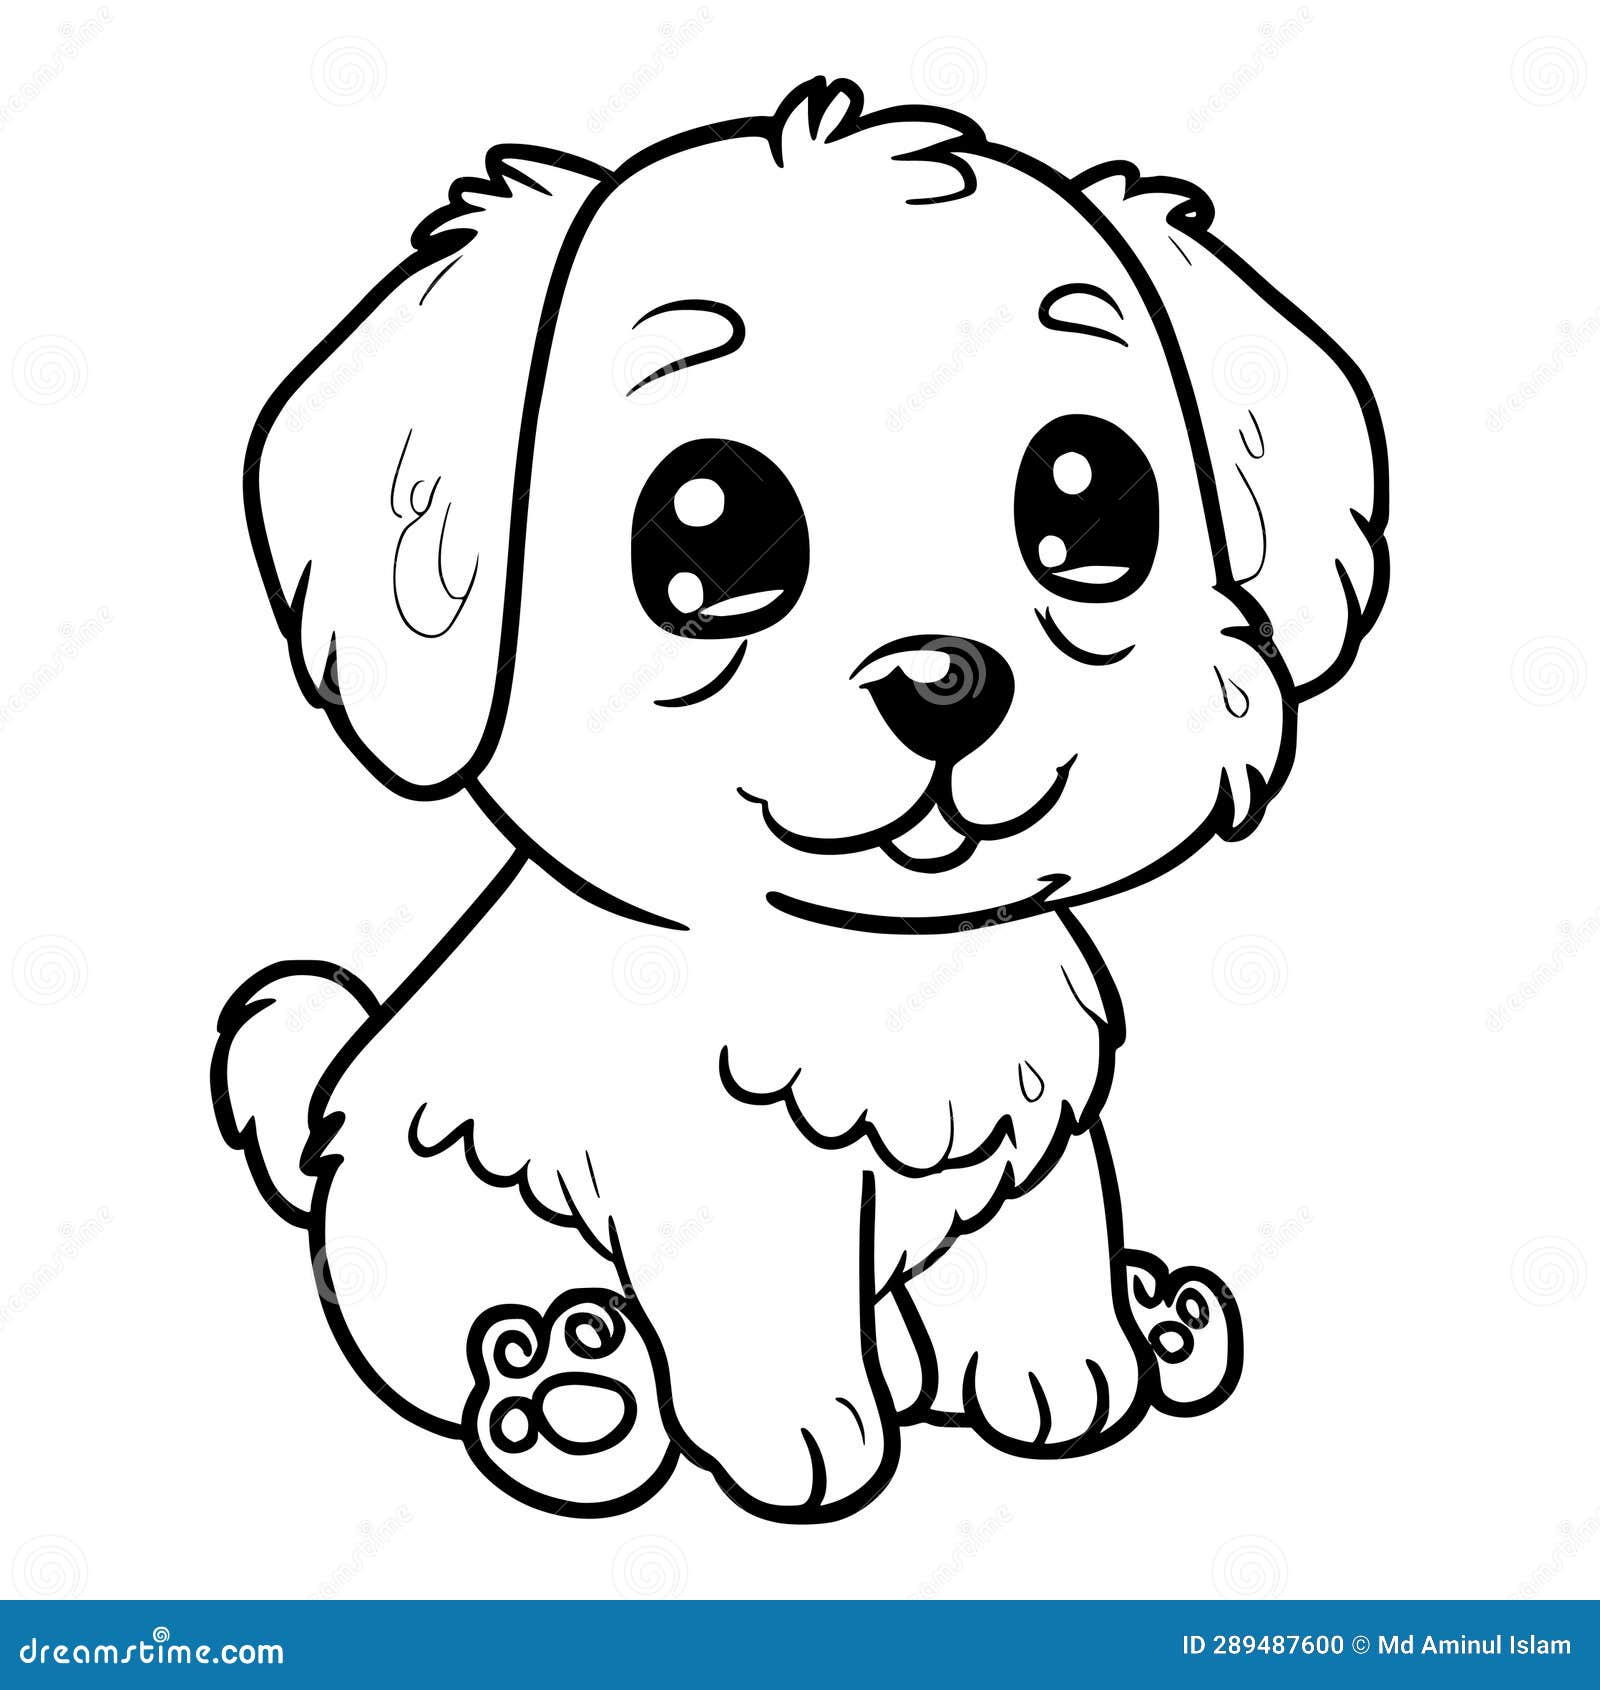 How to draw cute dog || cute puppy... - EASY Drawing ART | Facebook